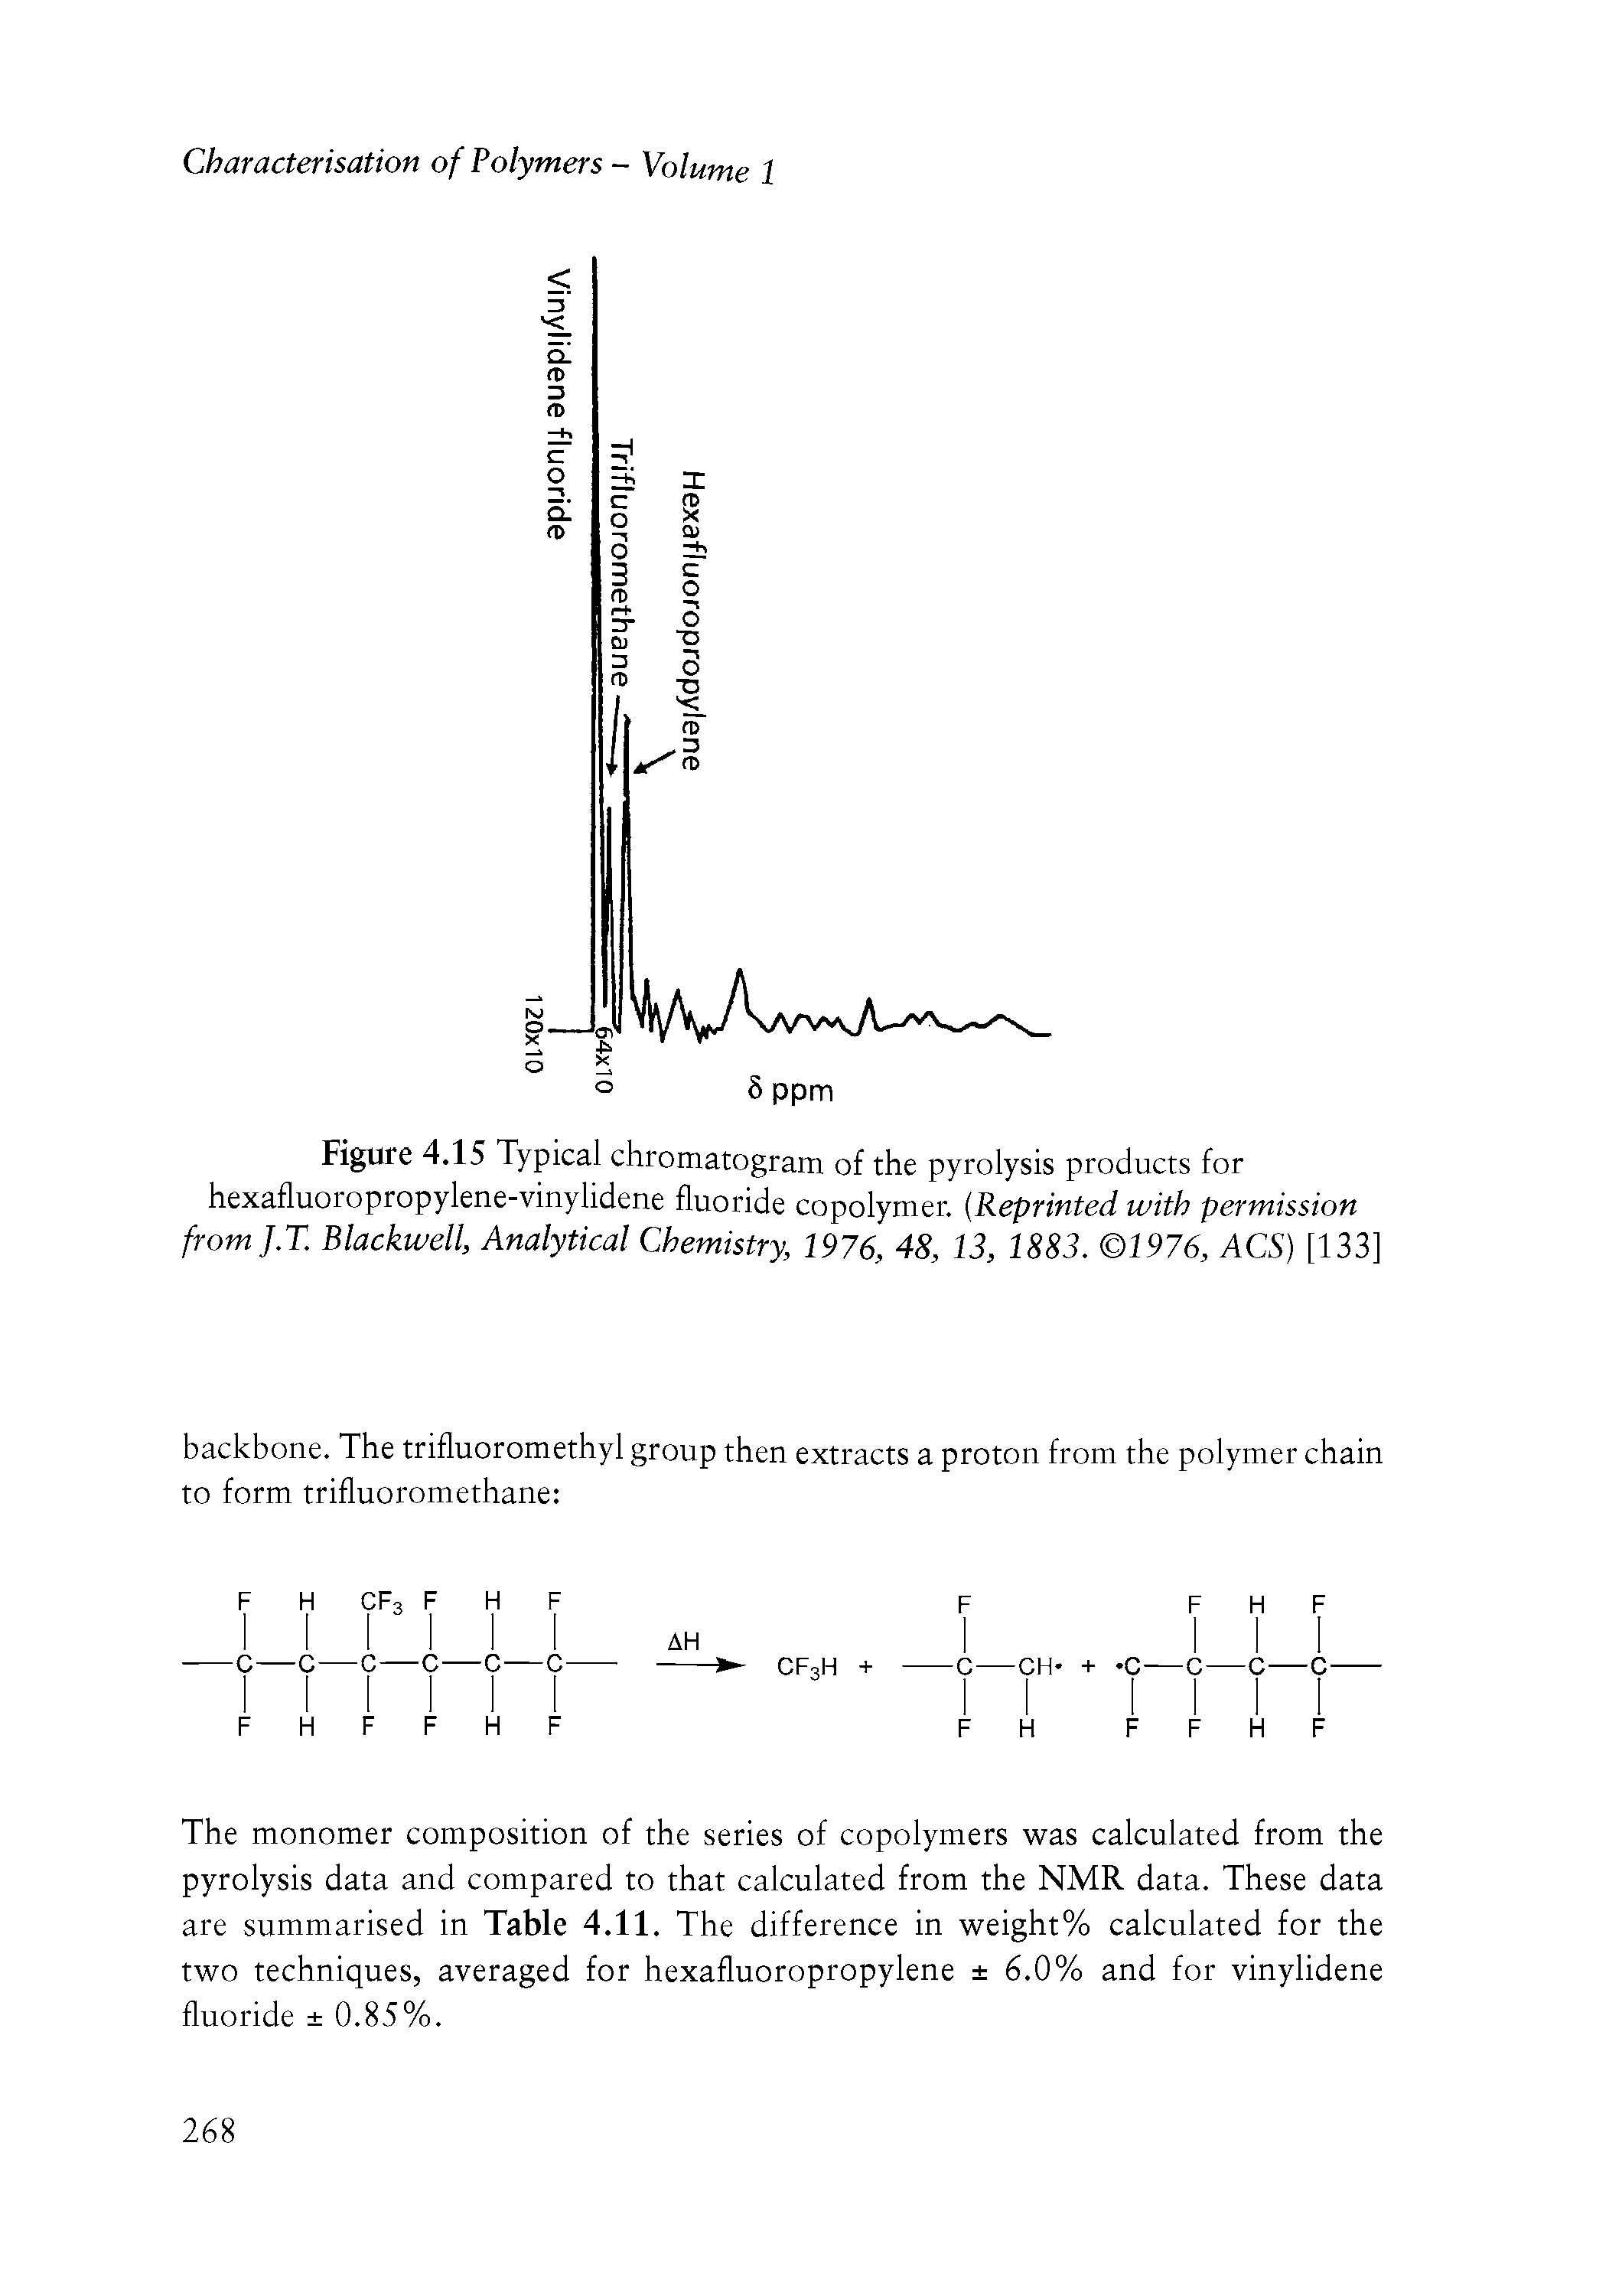 Figure 4.15 Typical chromatogram of the pyrolysis products for hexafluoropropylene-vinylidene fluoride copolymer. (Reprinted with permission fromJ.T Blackwell, Analytical Chemistry, 1976, 48, 13, 1883. 1976, ACS) [133]...